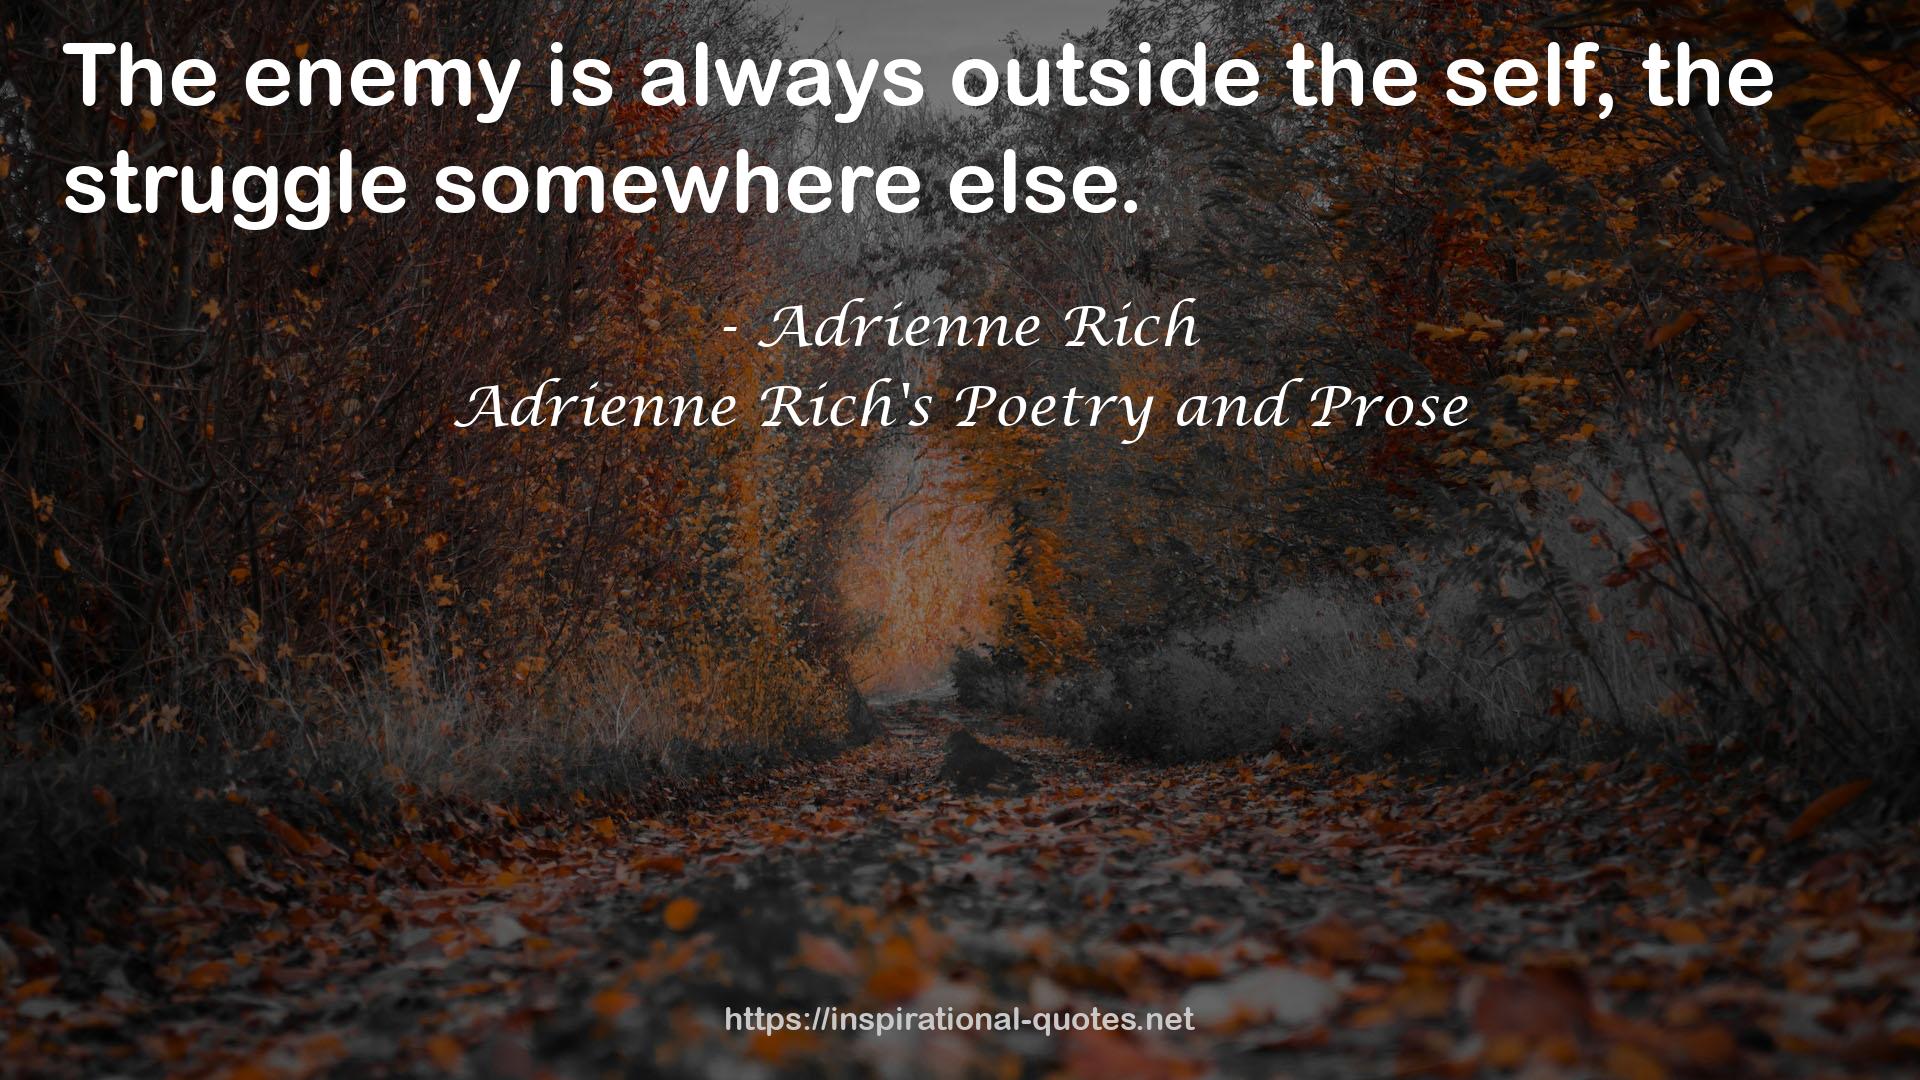 Adrienne Rich's Poetry and Prose QUOTES